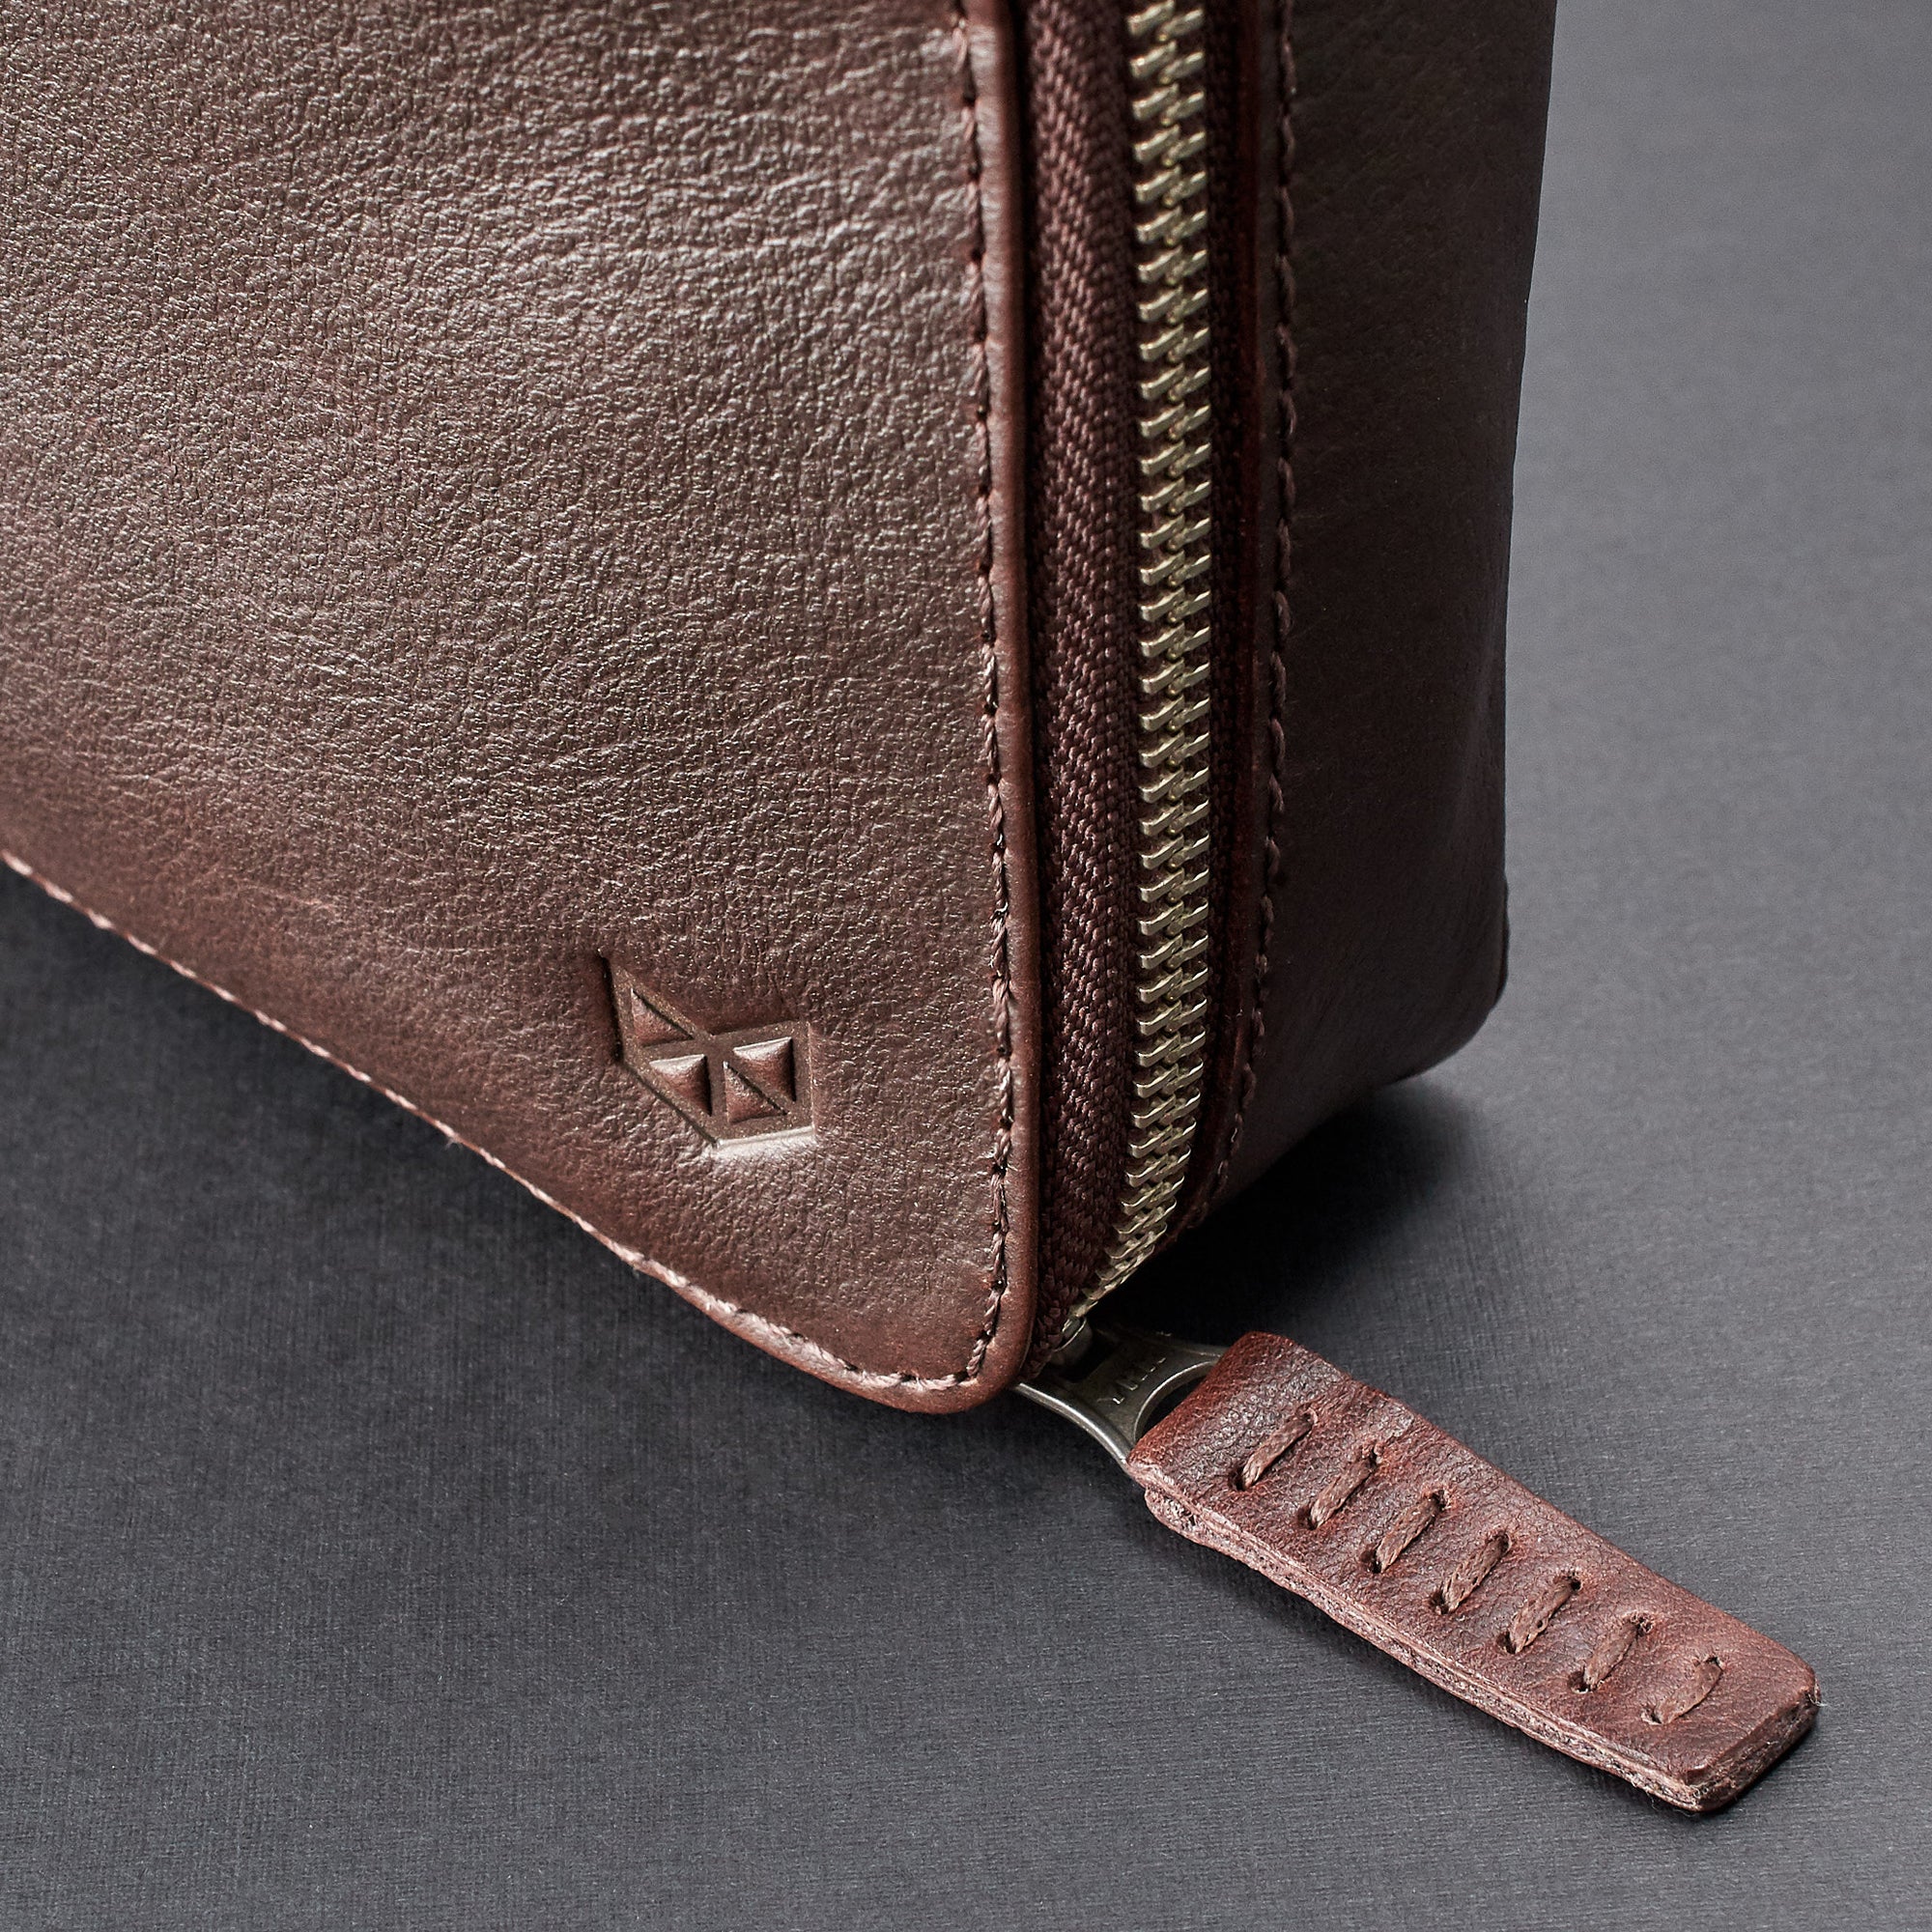 Hand stitched pull tabs. Dark brown travel gadget bag by Capra Leather